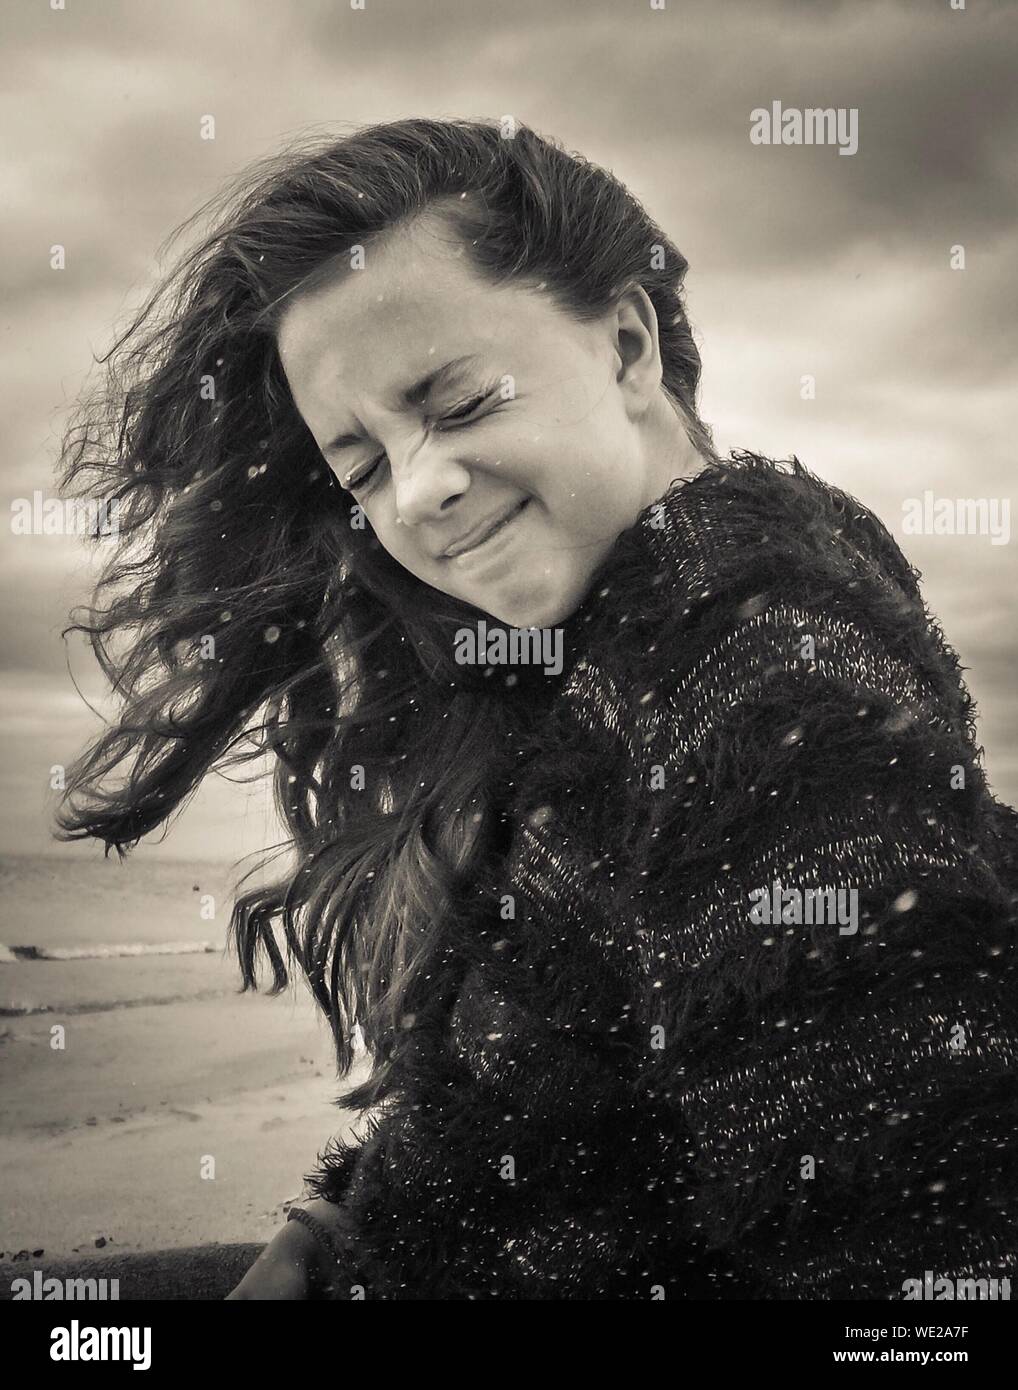 Young Woman With Eyes Closed At Beach During Windy Weather Stock Photo